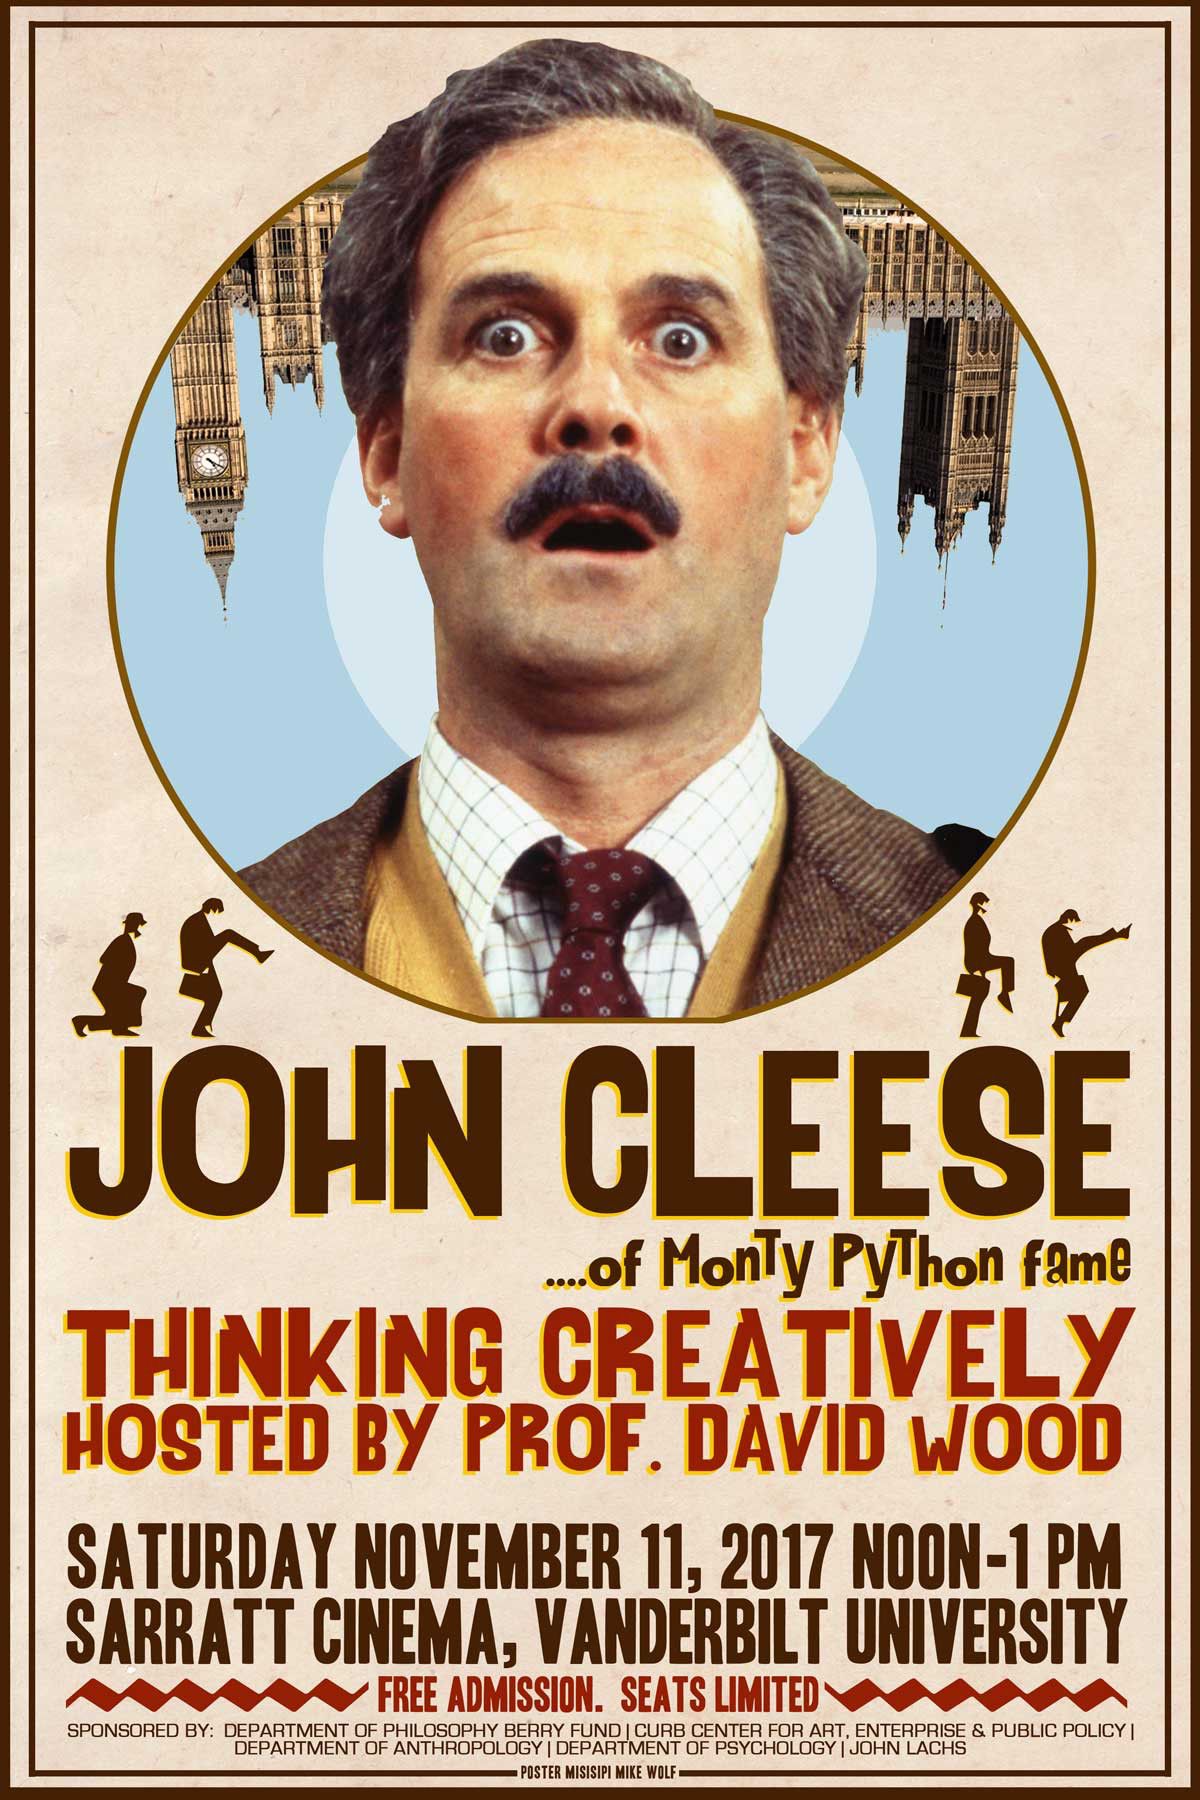 John Cleese at The Hanover Theatre for the Performing Arts